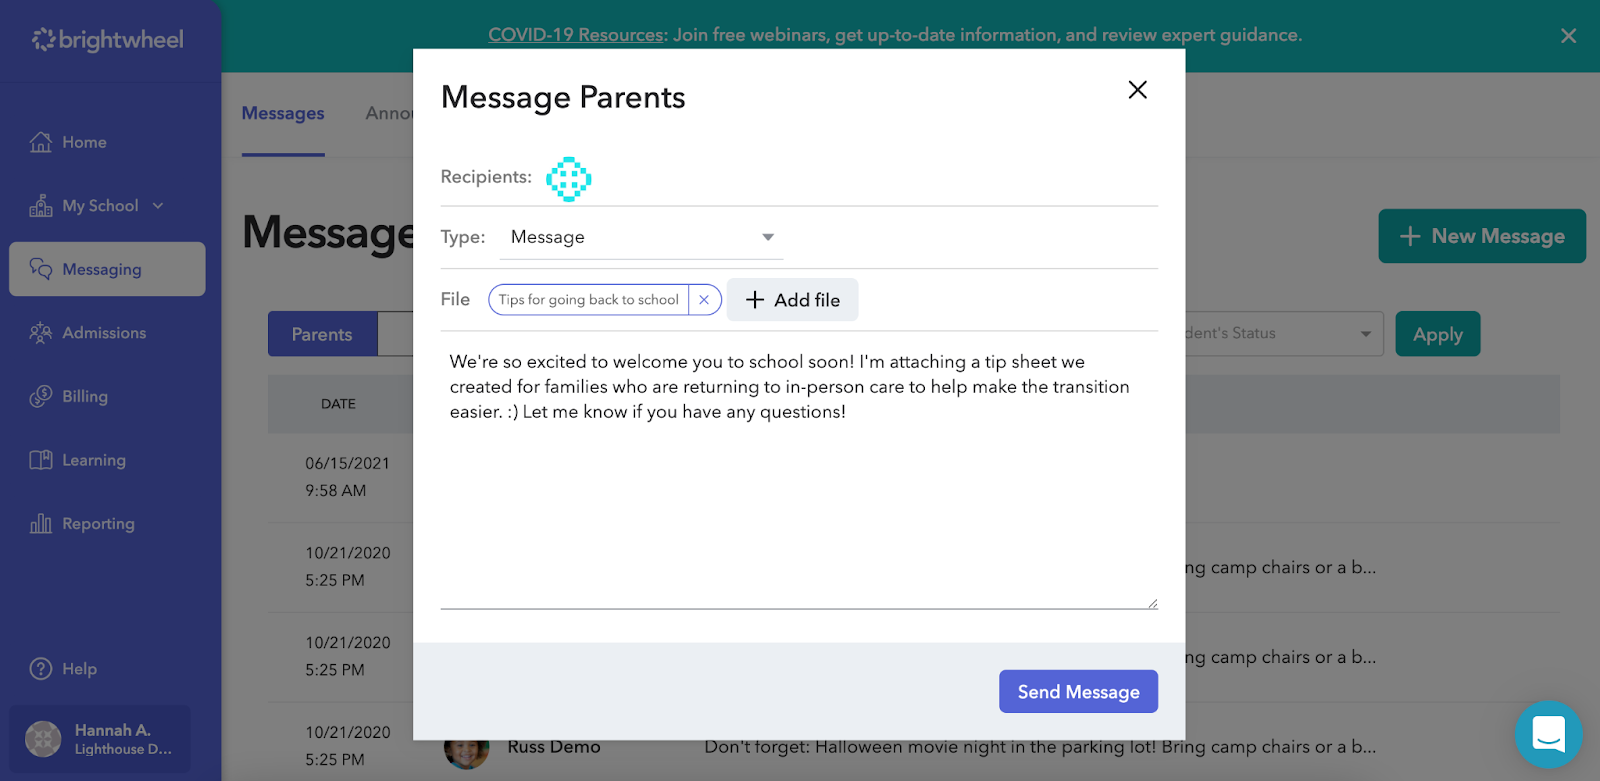 Brightwheel can help you transition families back to in-person care with parent messaging!